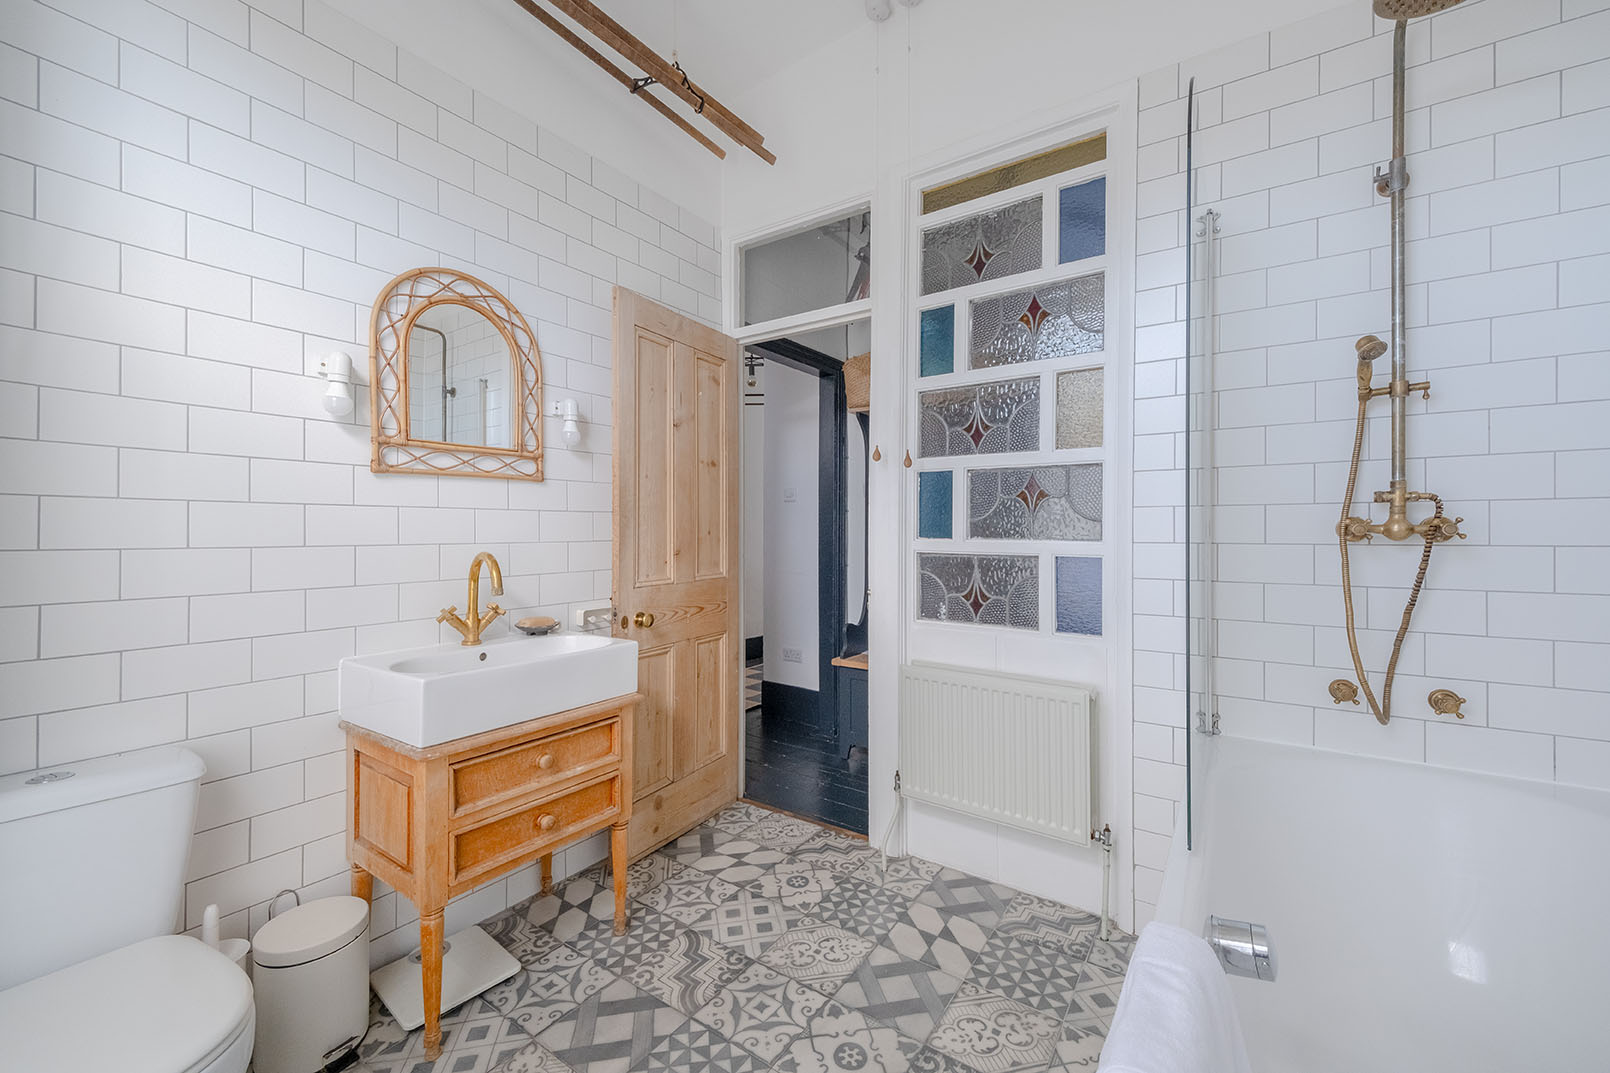 A large bathroom with white tiles, wooden vanity cupboard and grey patterned floor tiles taken for property photography.